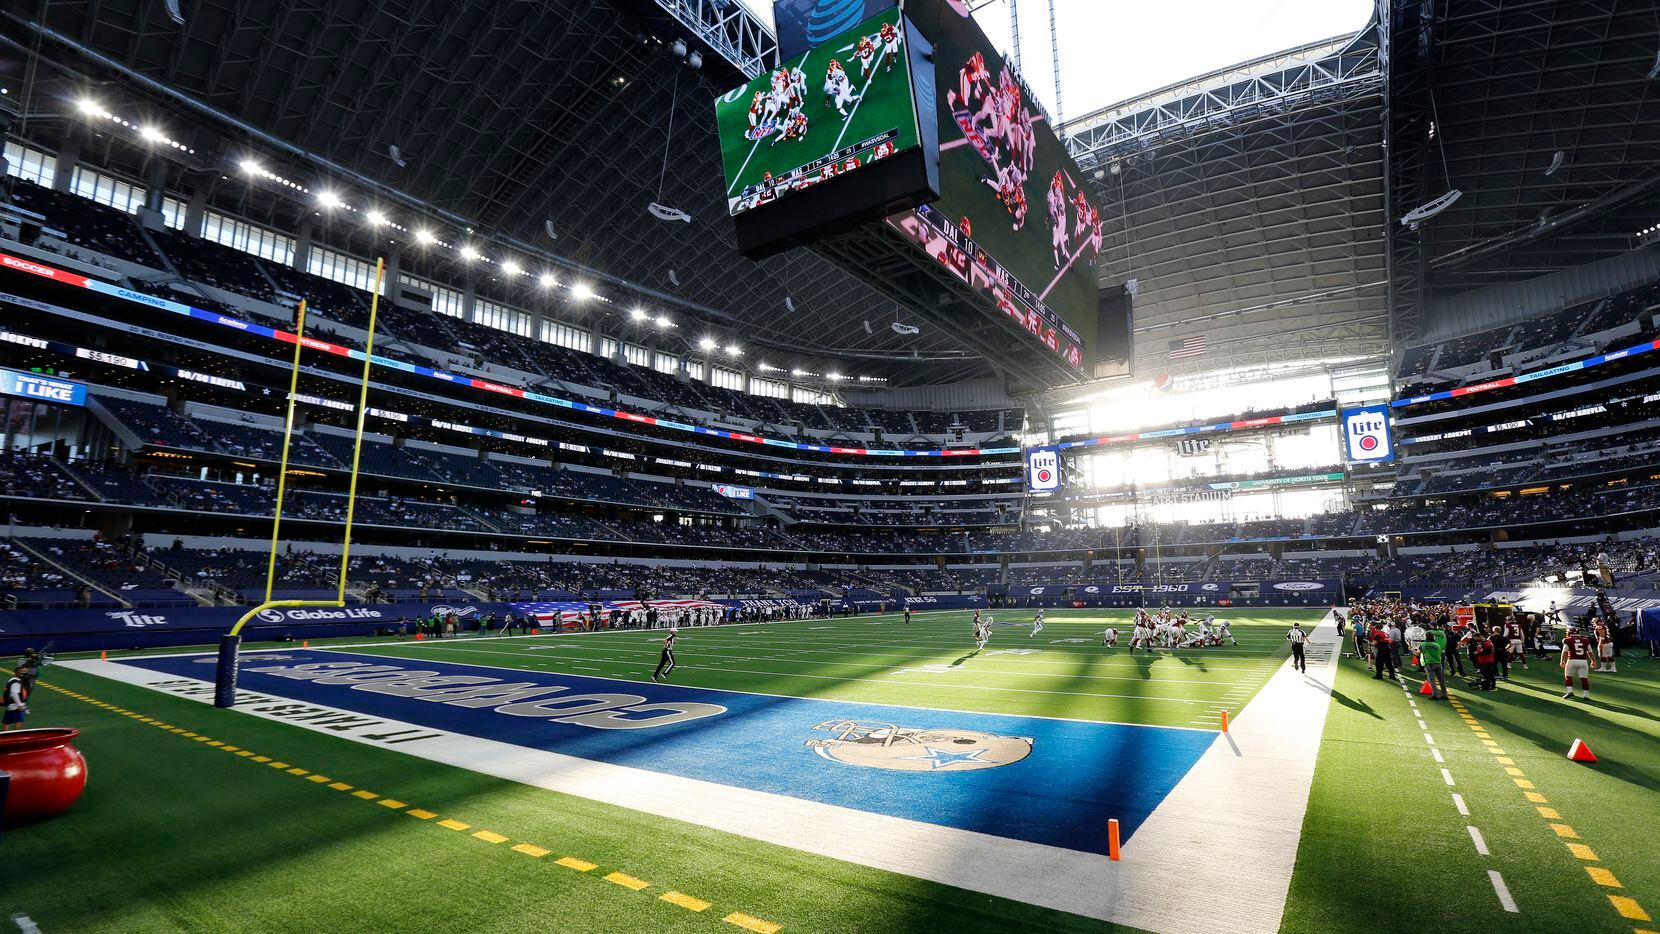 The sun shines through the open end zone doors and roof as the Dallas Cowboys faced the Washington Football Team at AT&T Stadium in Arlington, Thursday, November 26, 2020.